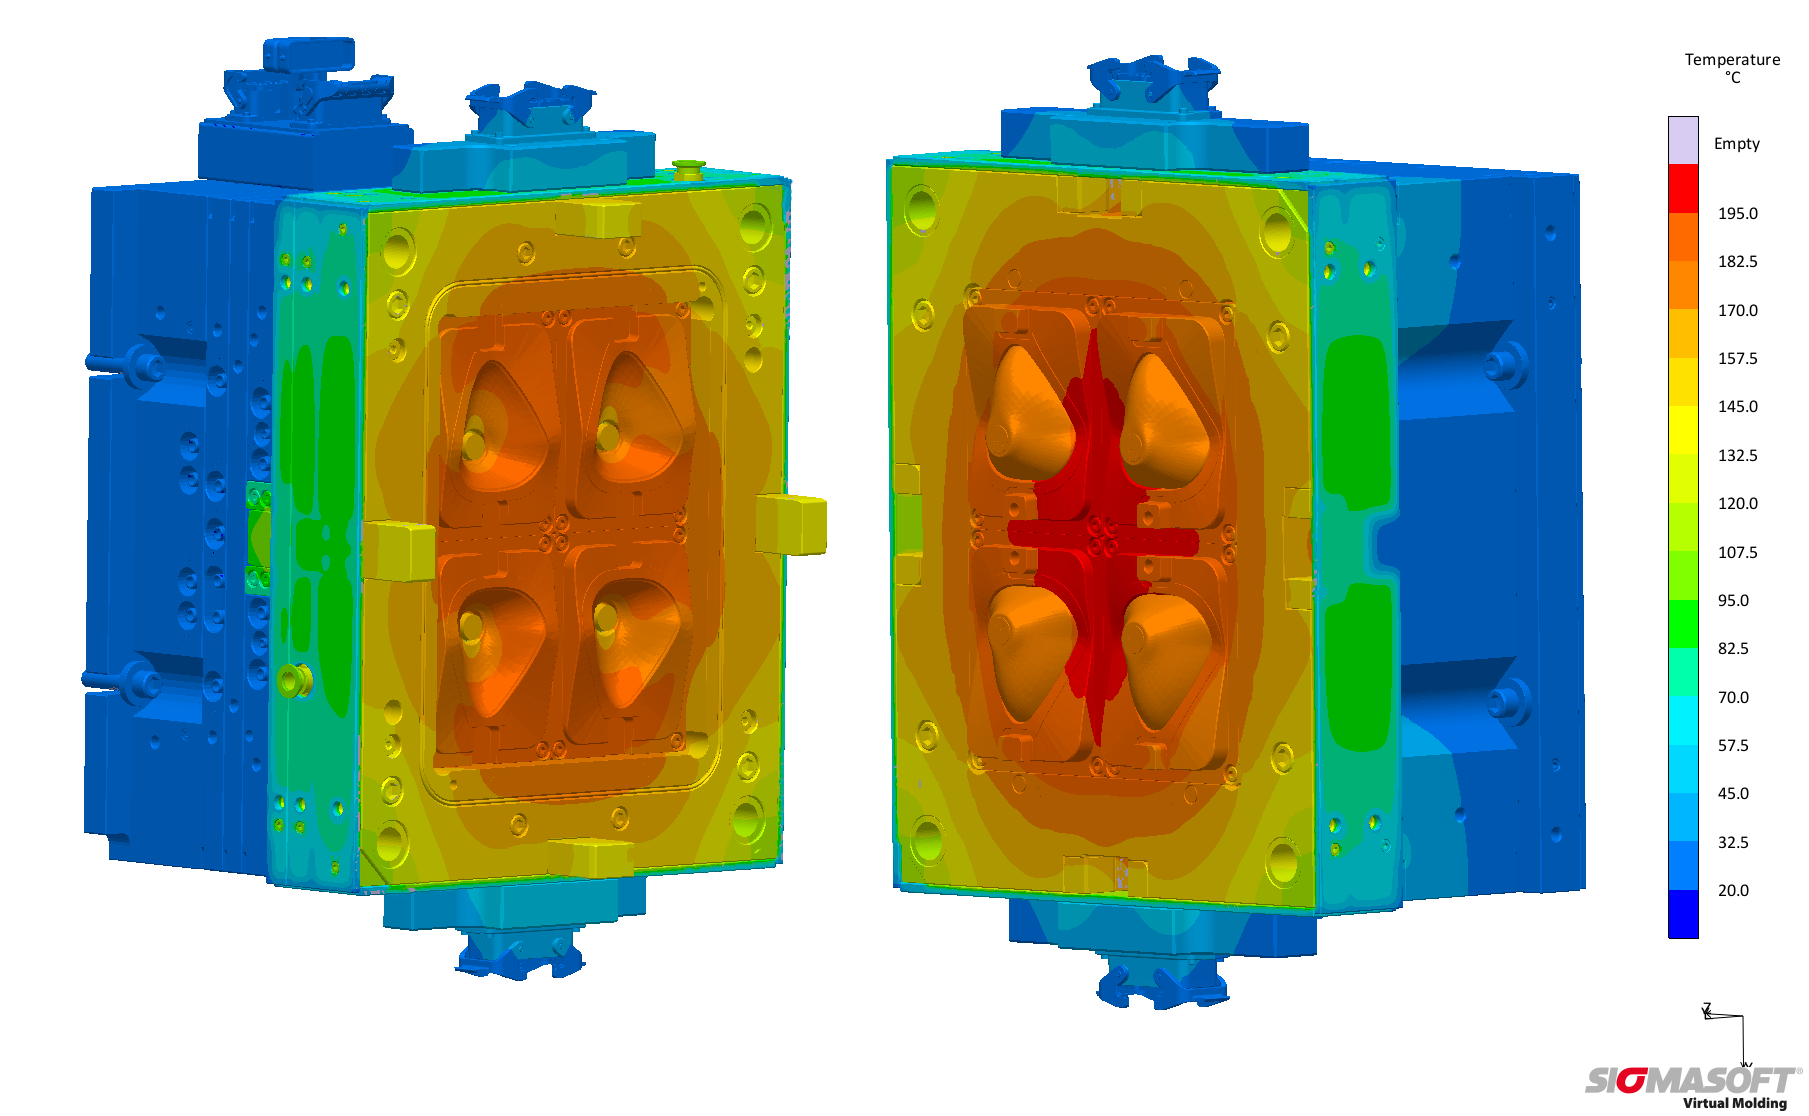 Sigmasoft said that its Virtual Molding software was used to determine and optimize injection points.